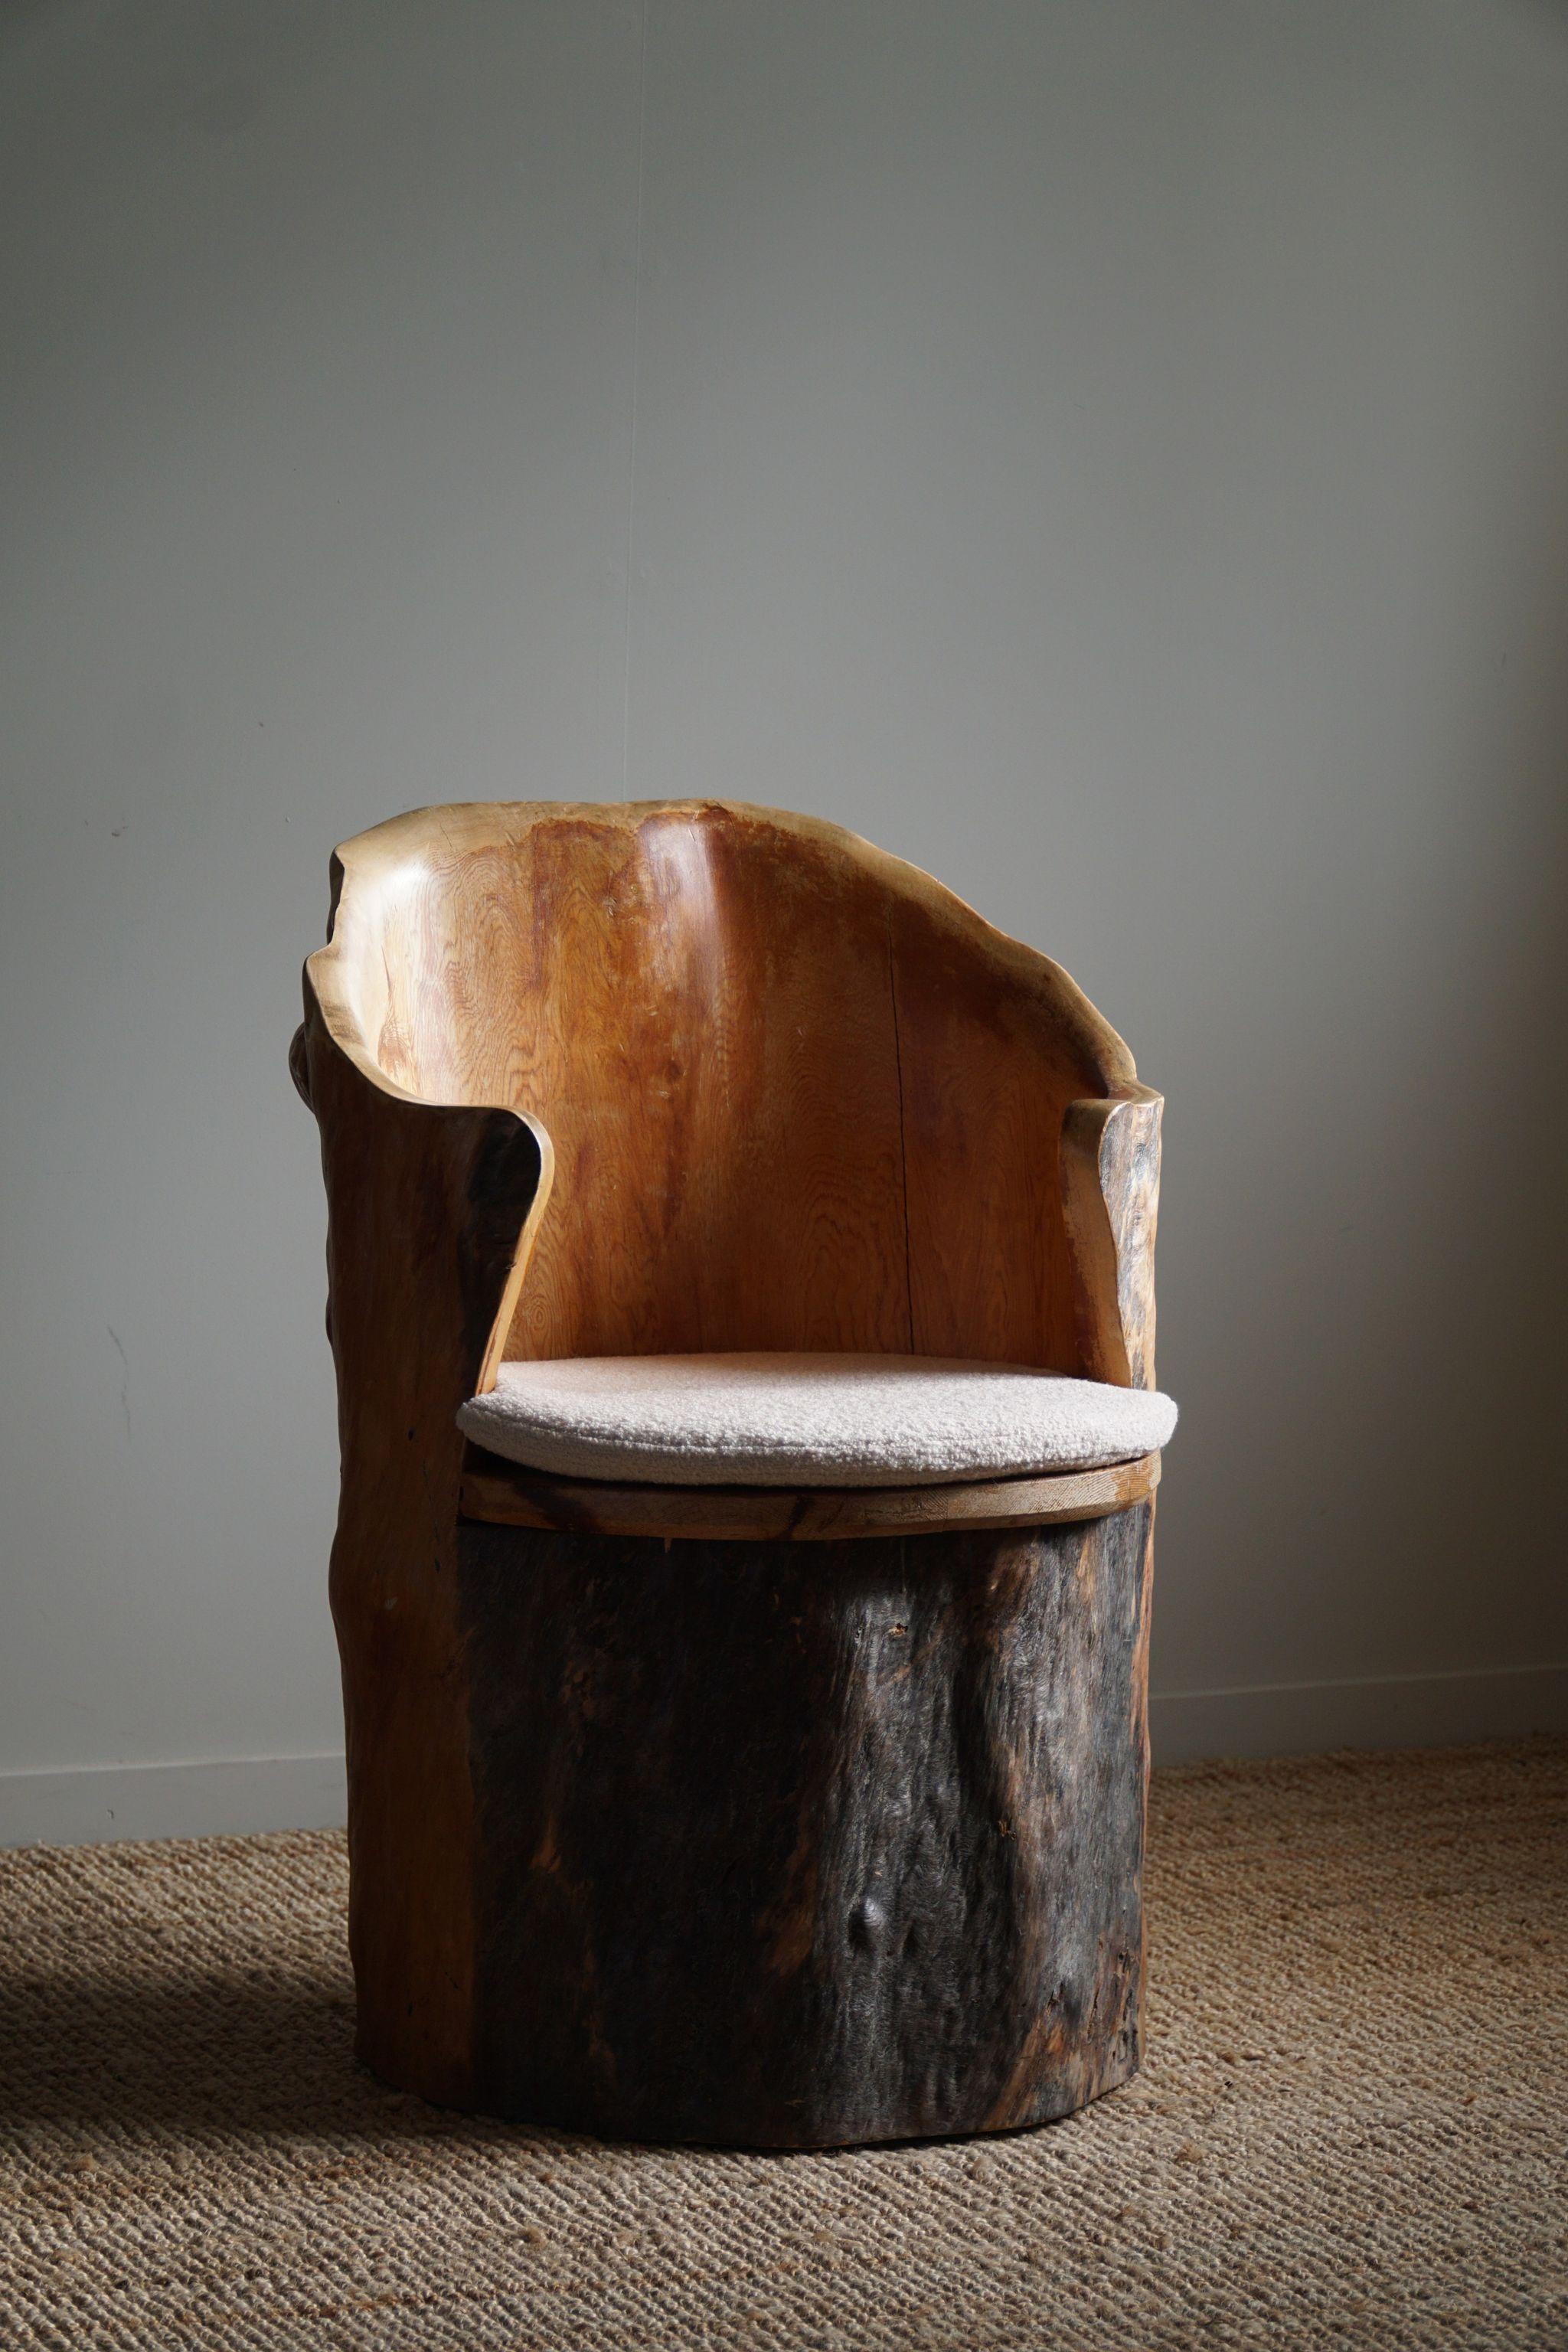 Hand-Carved Brutalist Stump Chair in Solid Pine, Wabi Sabi Style, Swedish, 1970s For Sale 10